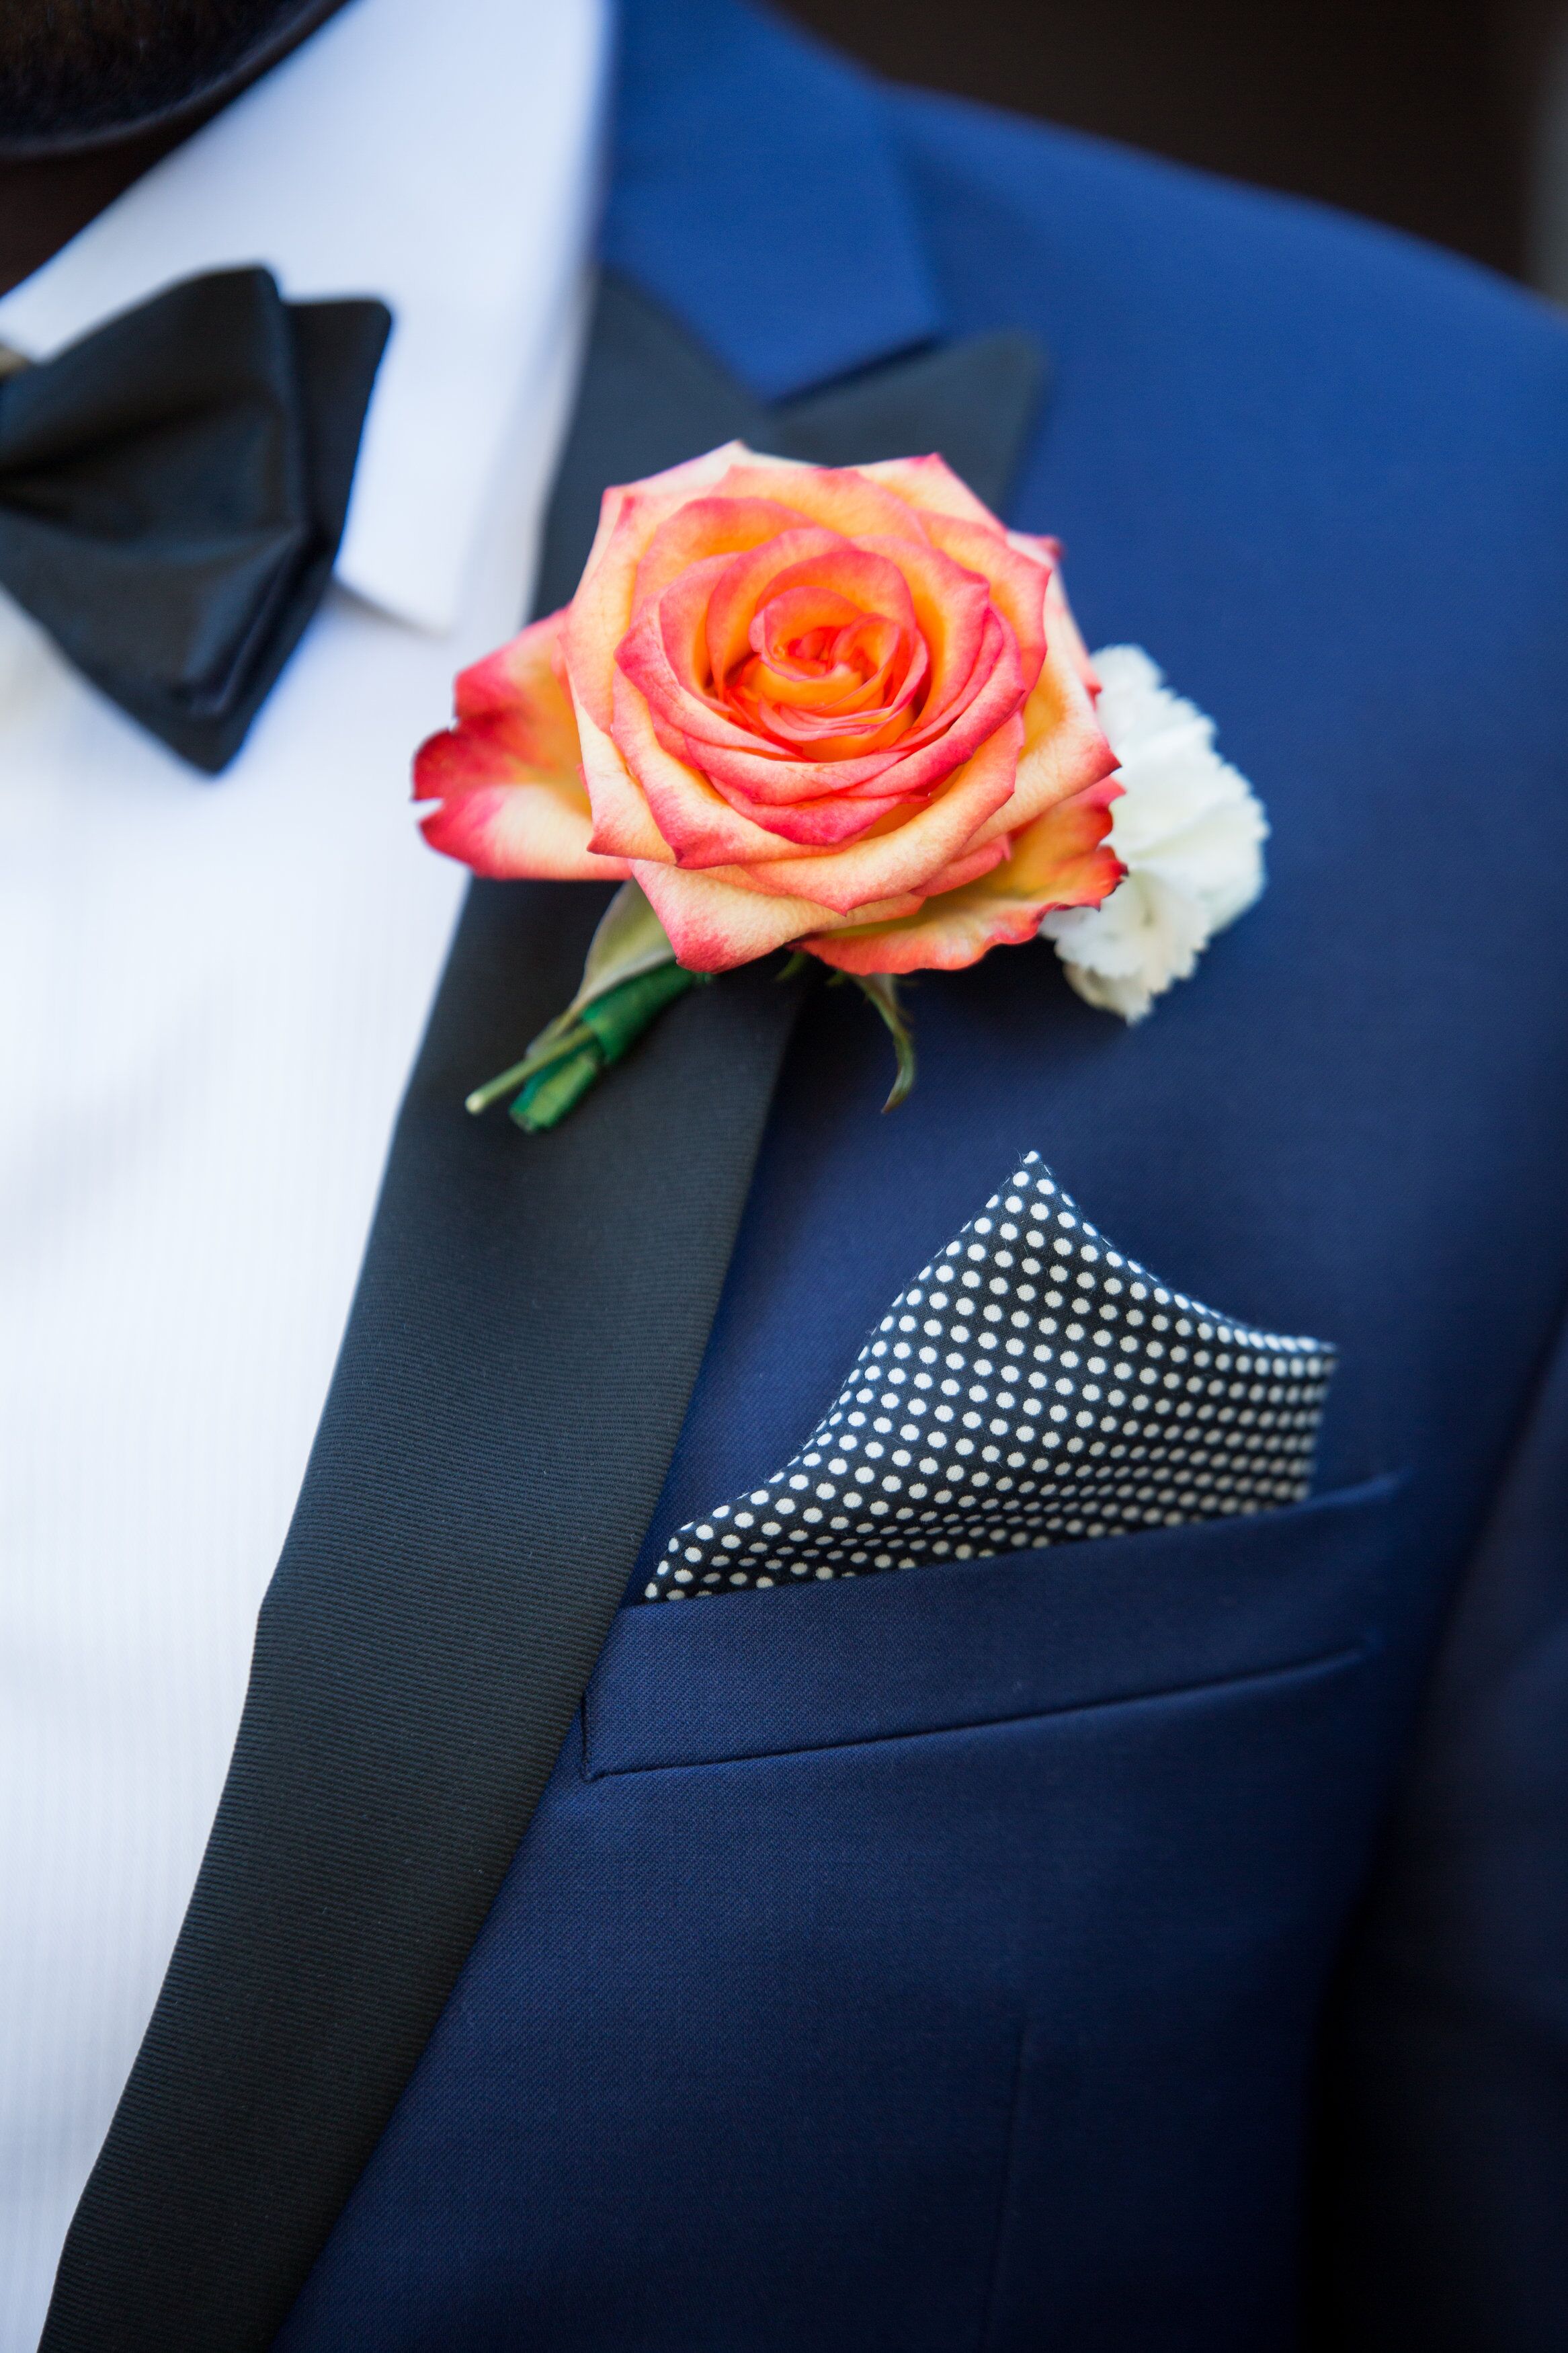 Coral Rose Boutonniere And Polka Dot Pocket Square